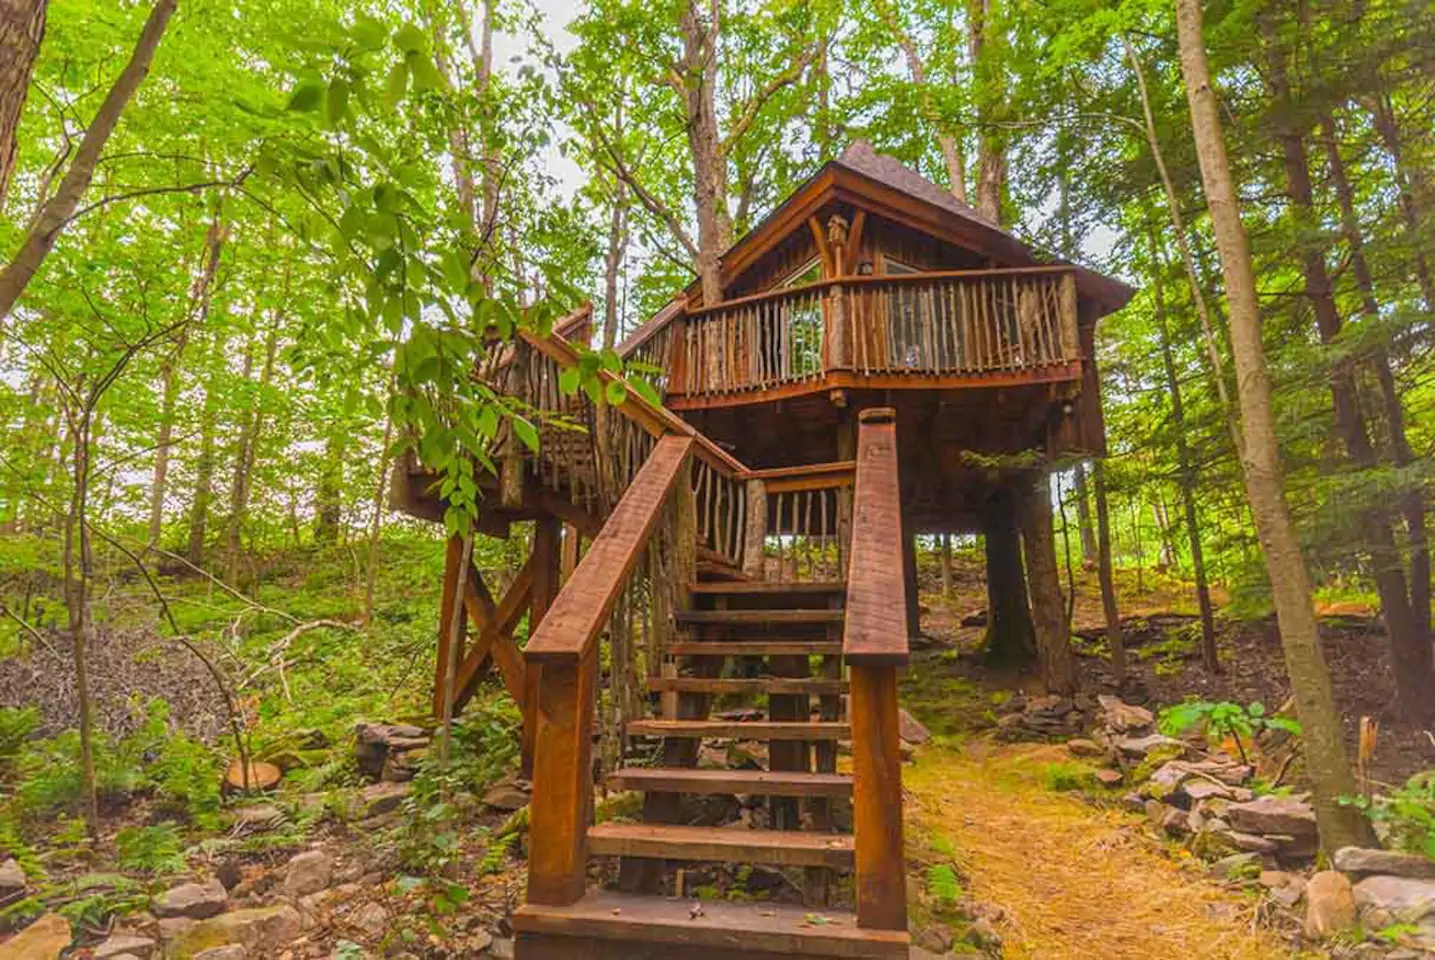 A treehouse with wide wooden entry staircase